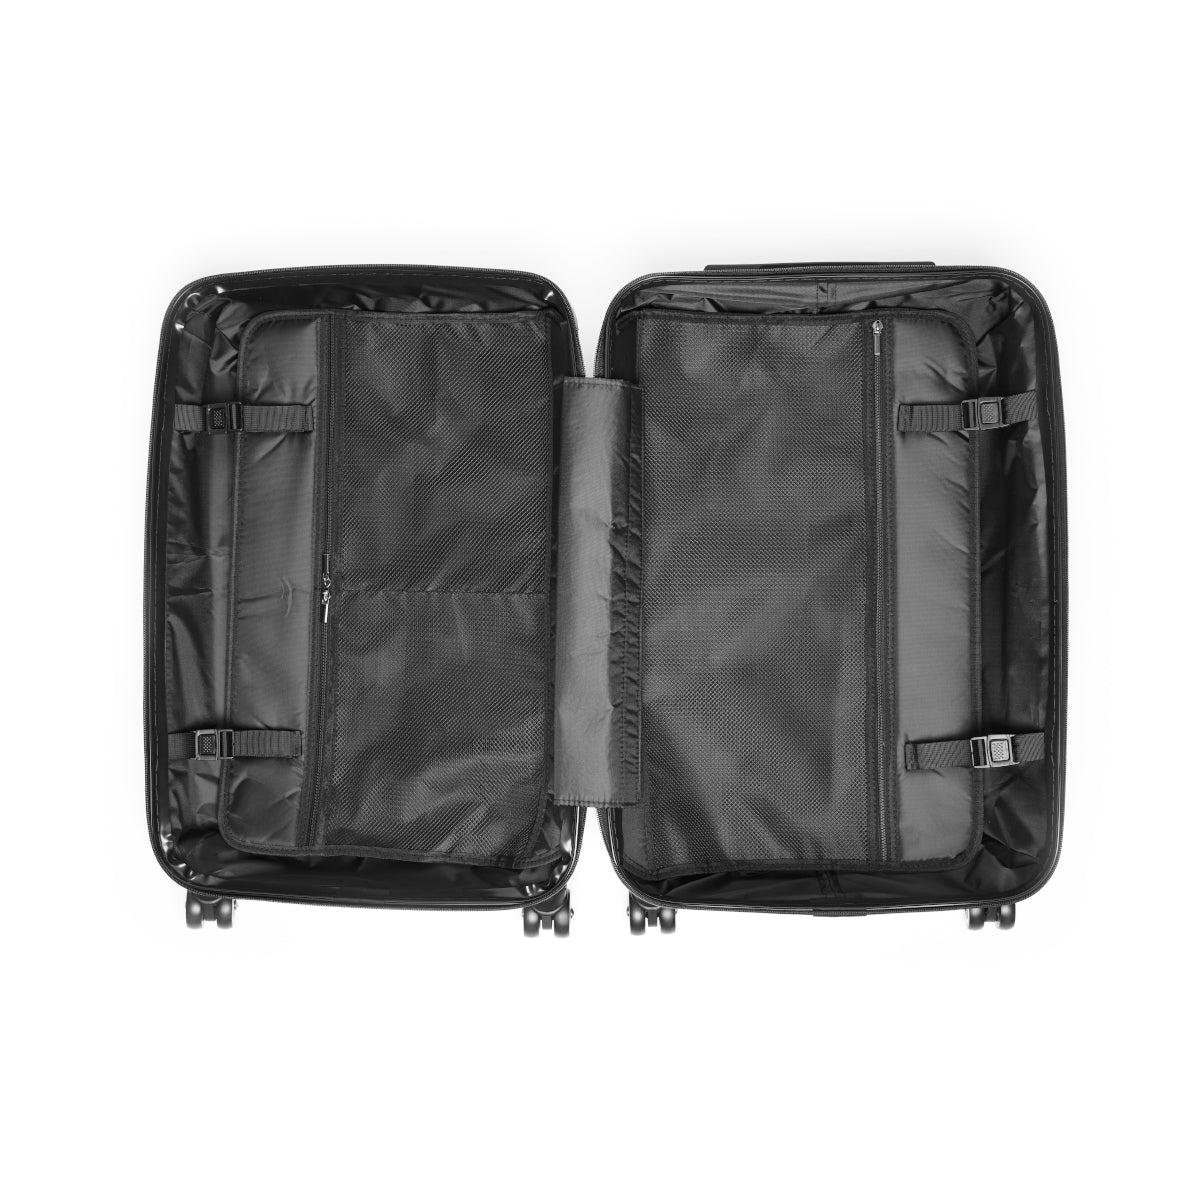 WALLPAPER Suitcases | CANAANWEAR | Luggage | Travel